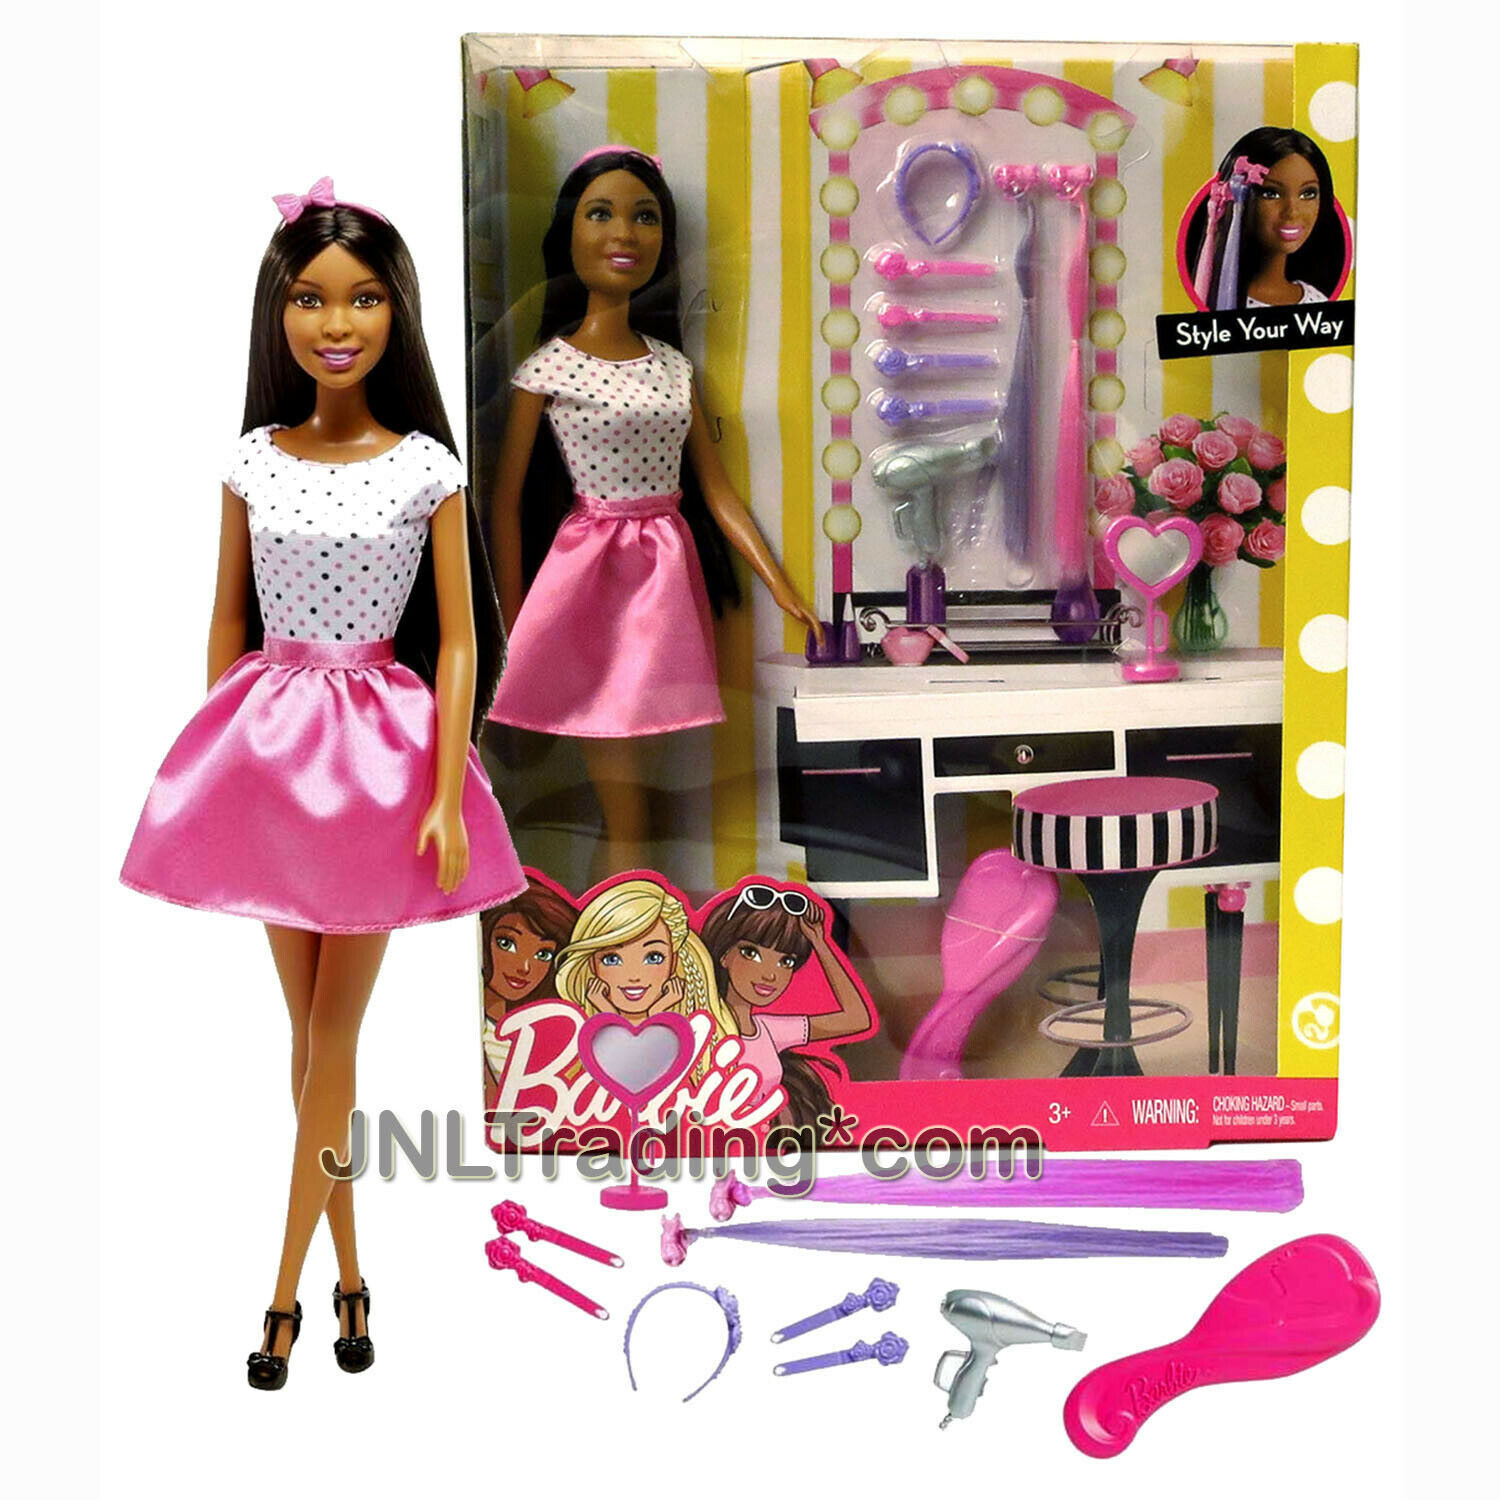 New Barbie Style Your Way 12" Doll Set and similar items